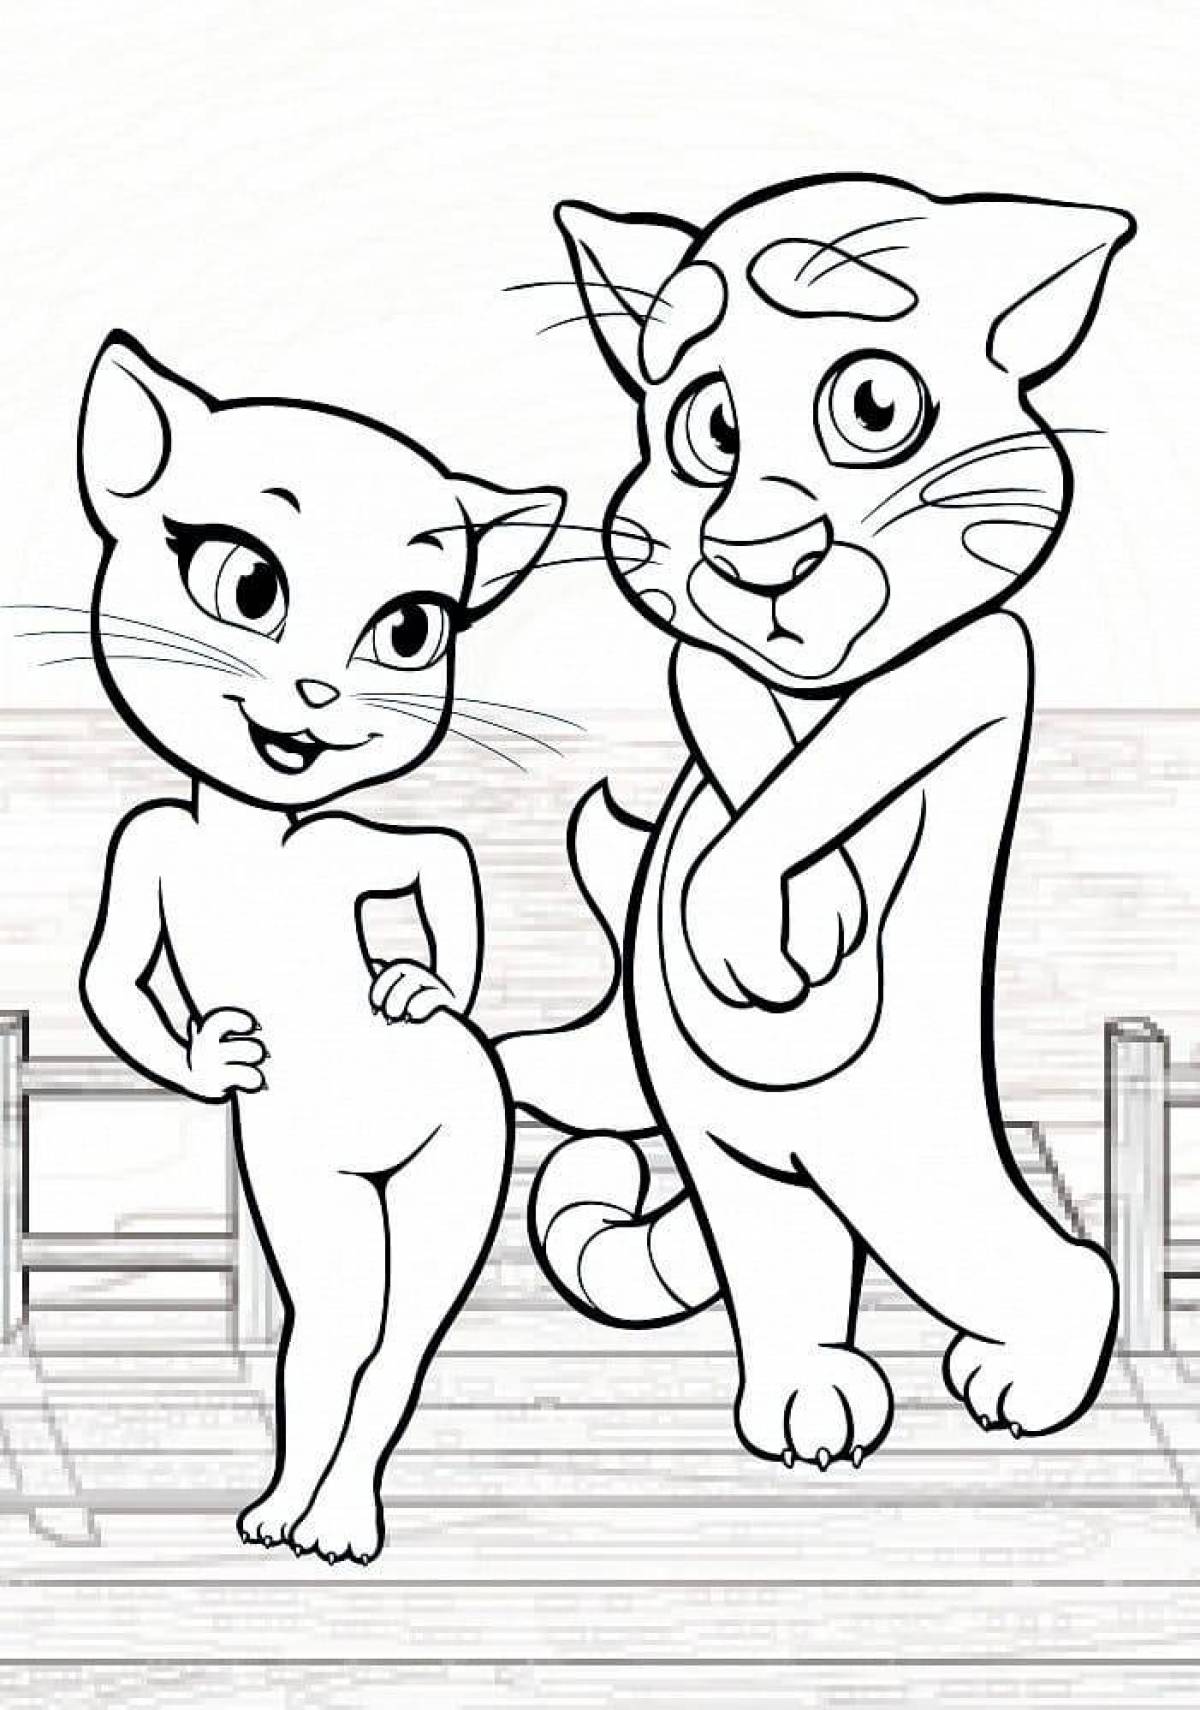 Colorful talking tom coloring page